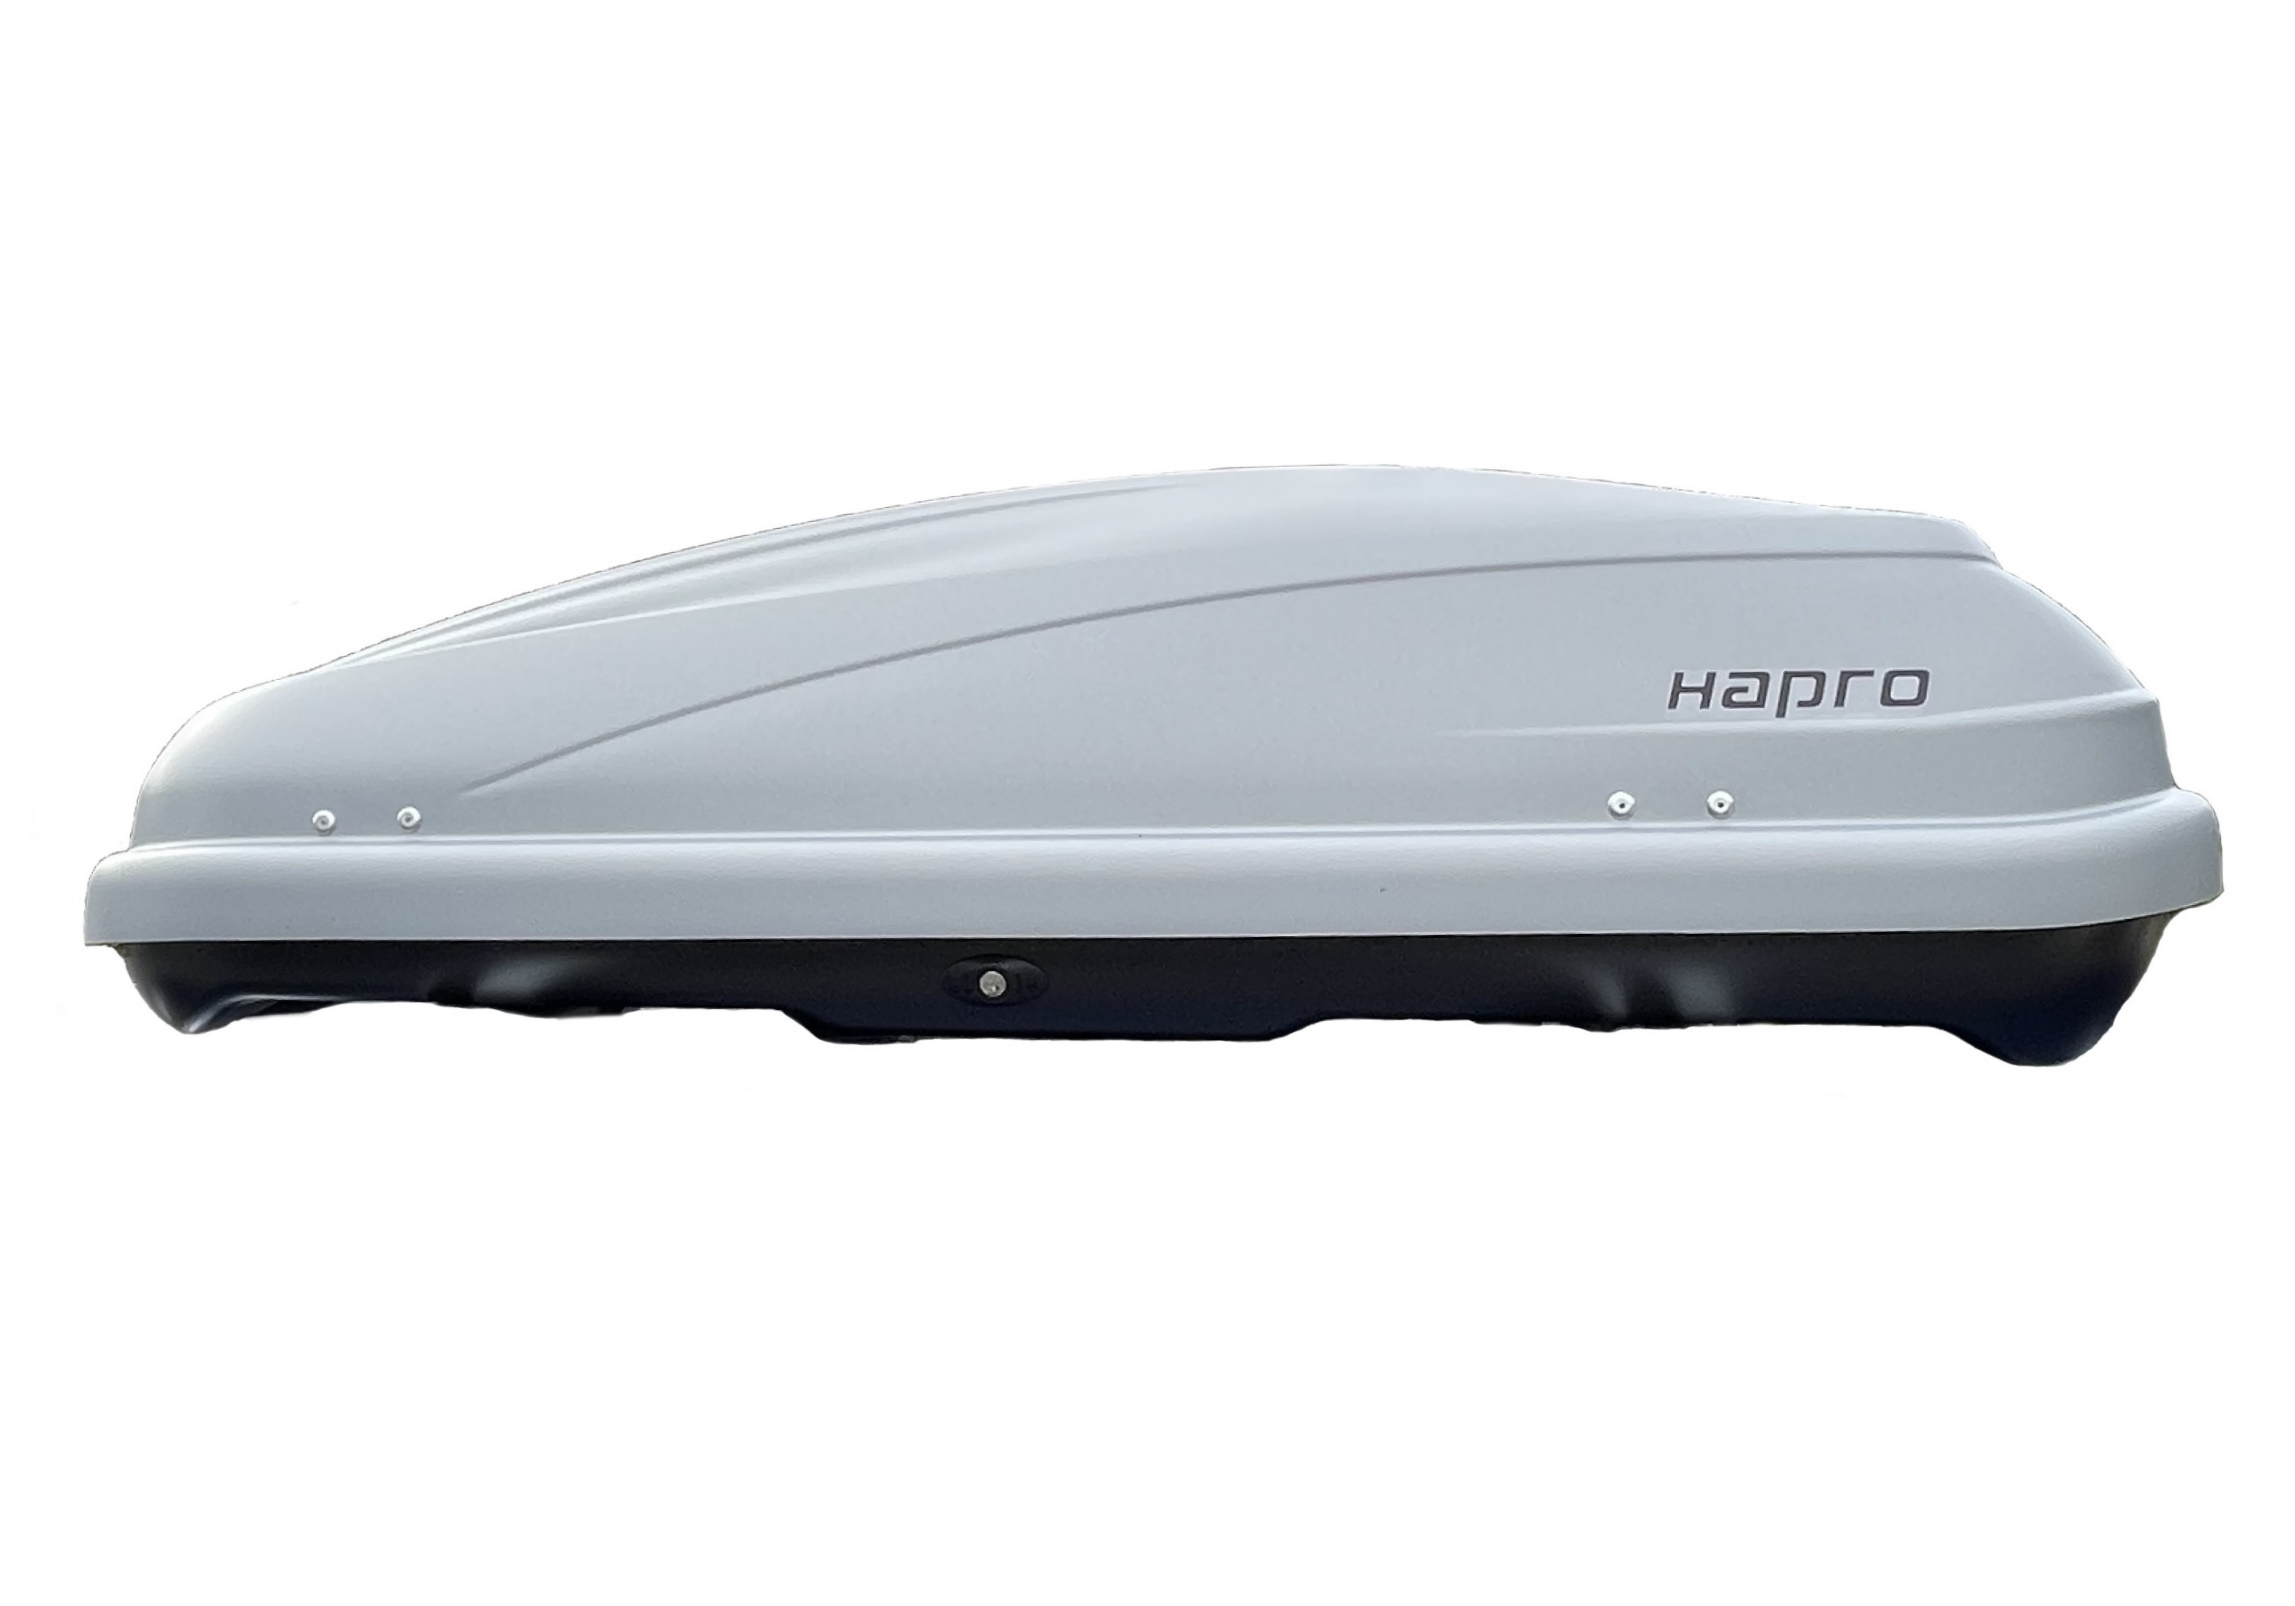 Package deal: Hapro Roady 4000 left-hand opening, silver-grey, box and bars